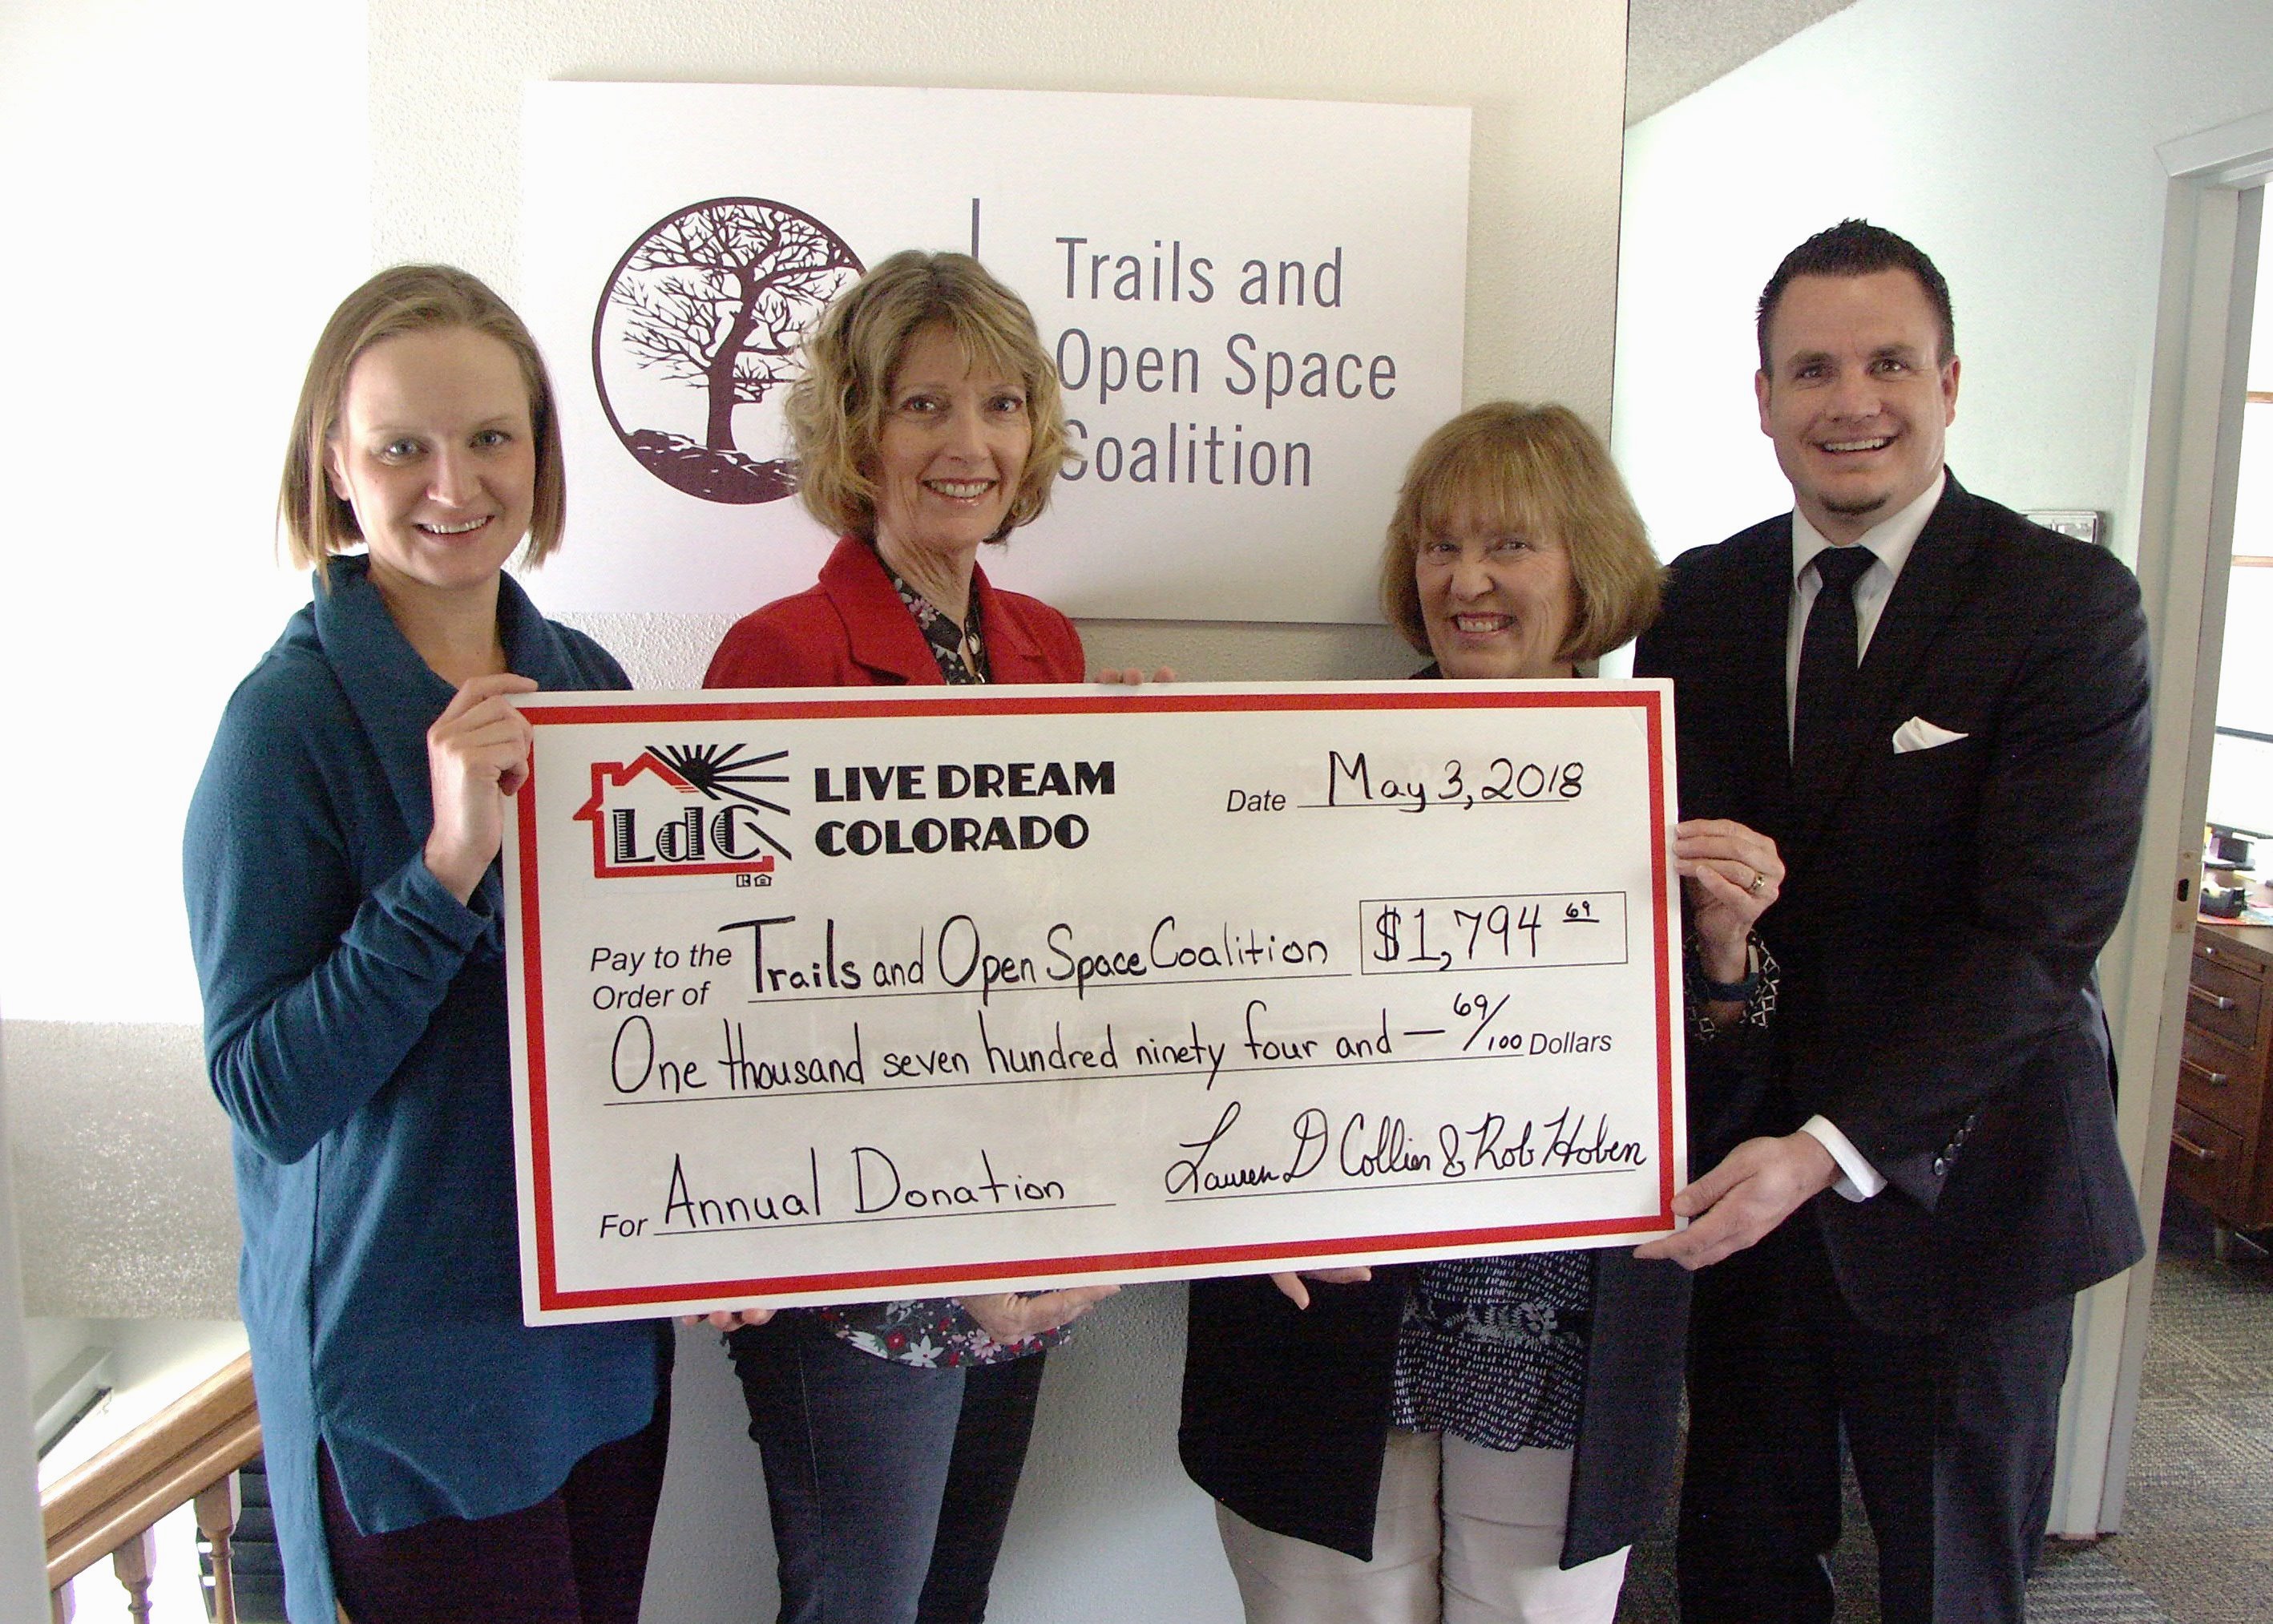 Lauren D Collier and Rob Hoben present donation to Trails and Open Space Coalition Executive Director Susan Davies and Outreach Director Eileen Healy